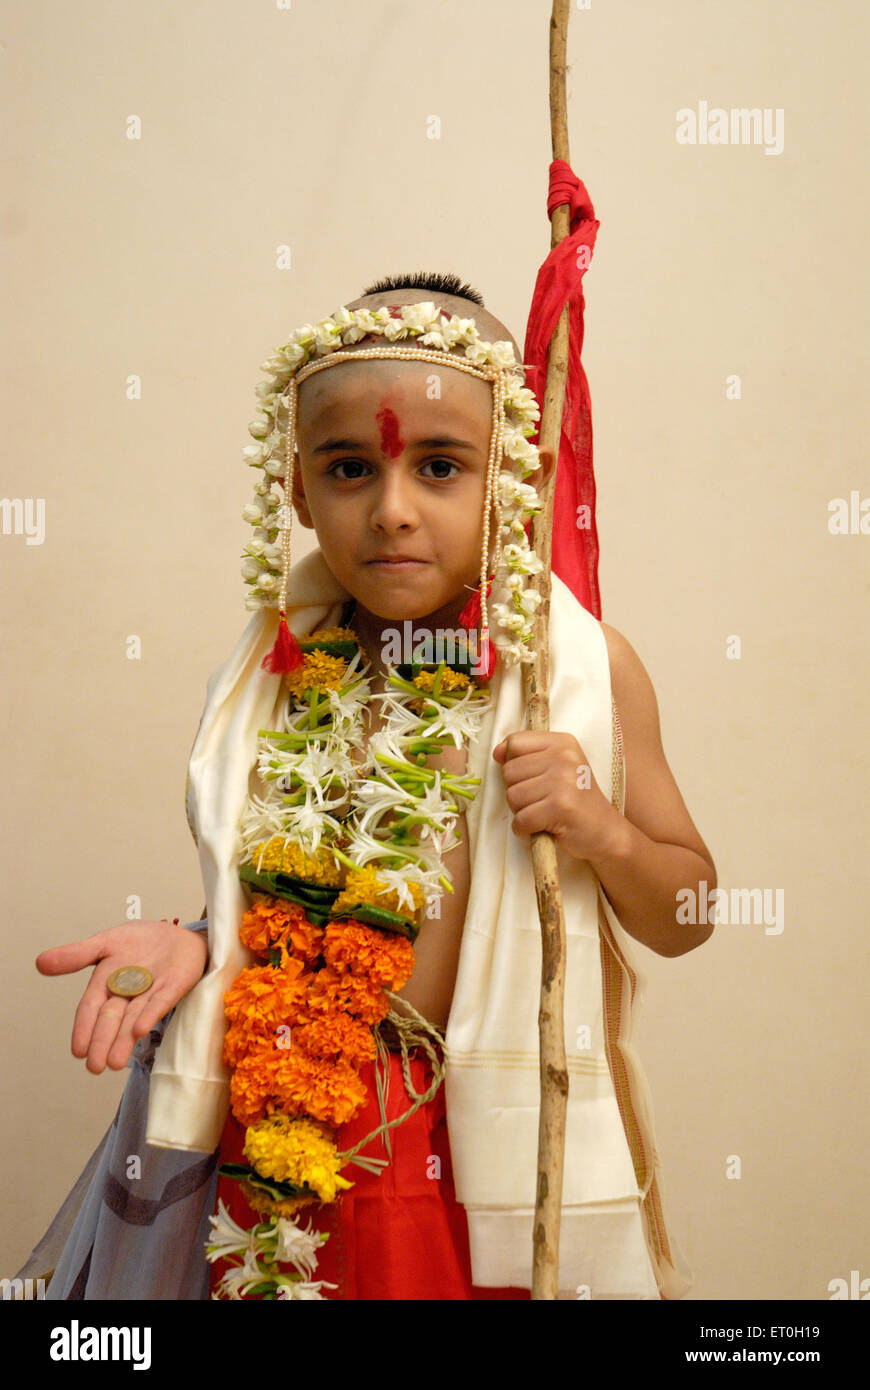 Indian bald head eight year old boy on thread ceremony - Model Release Number # 721 Stock Photo